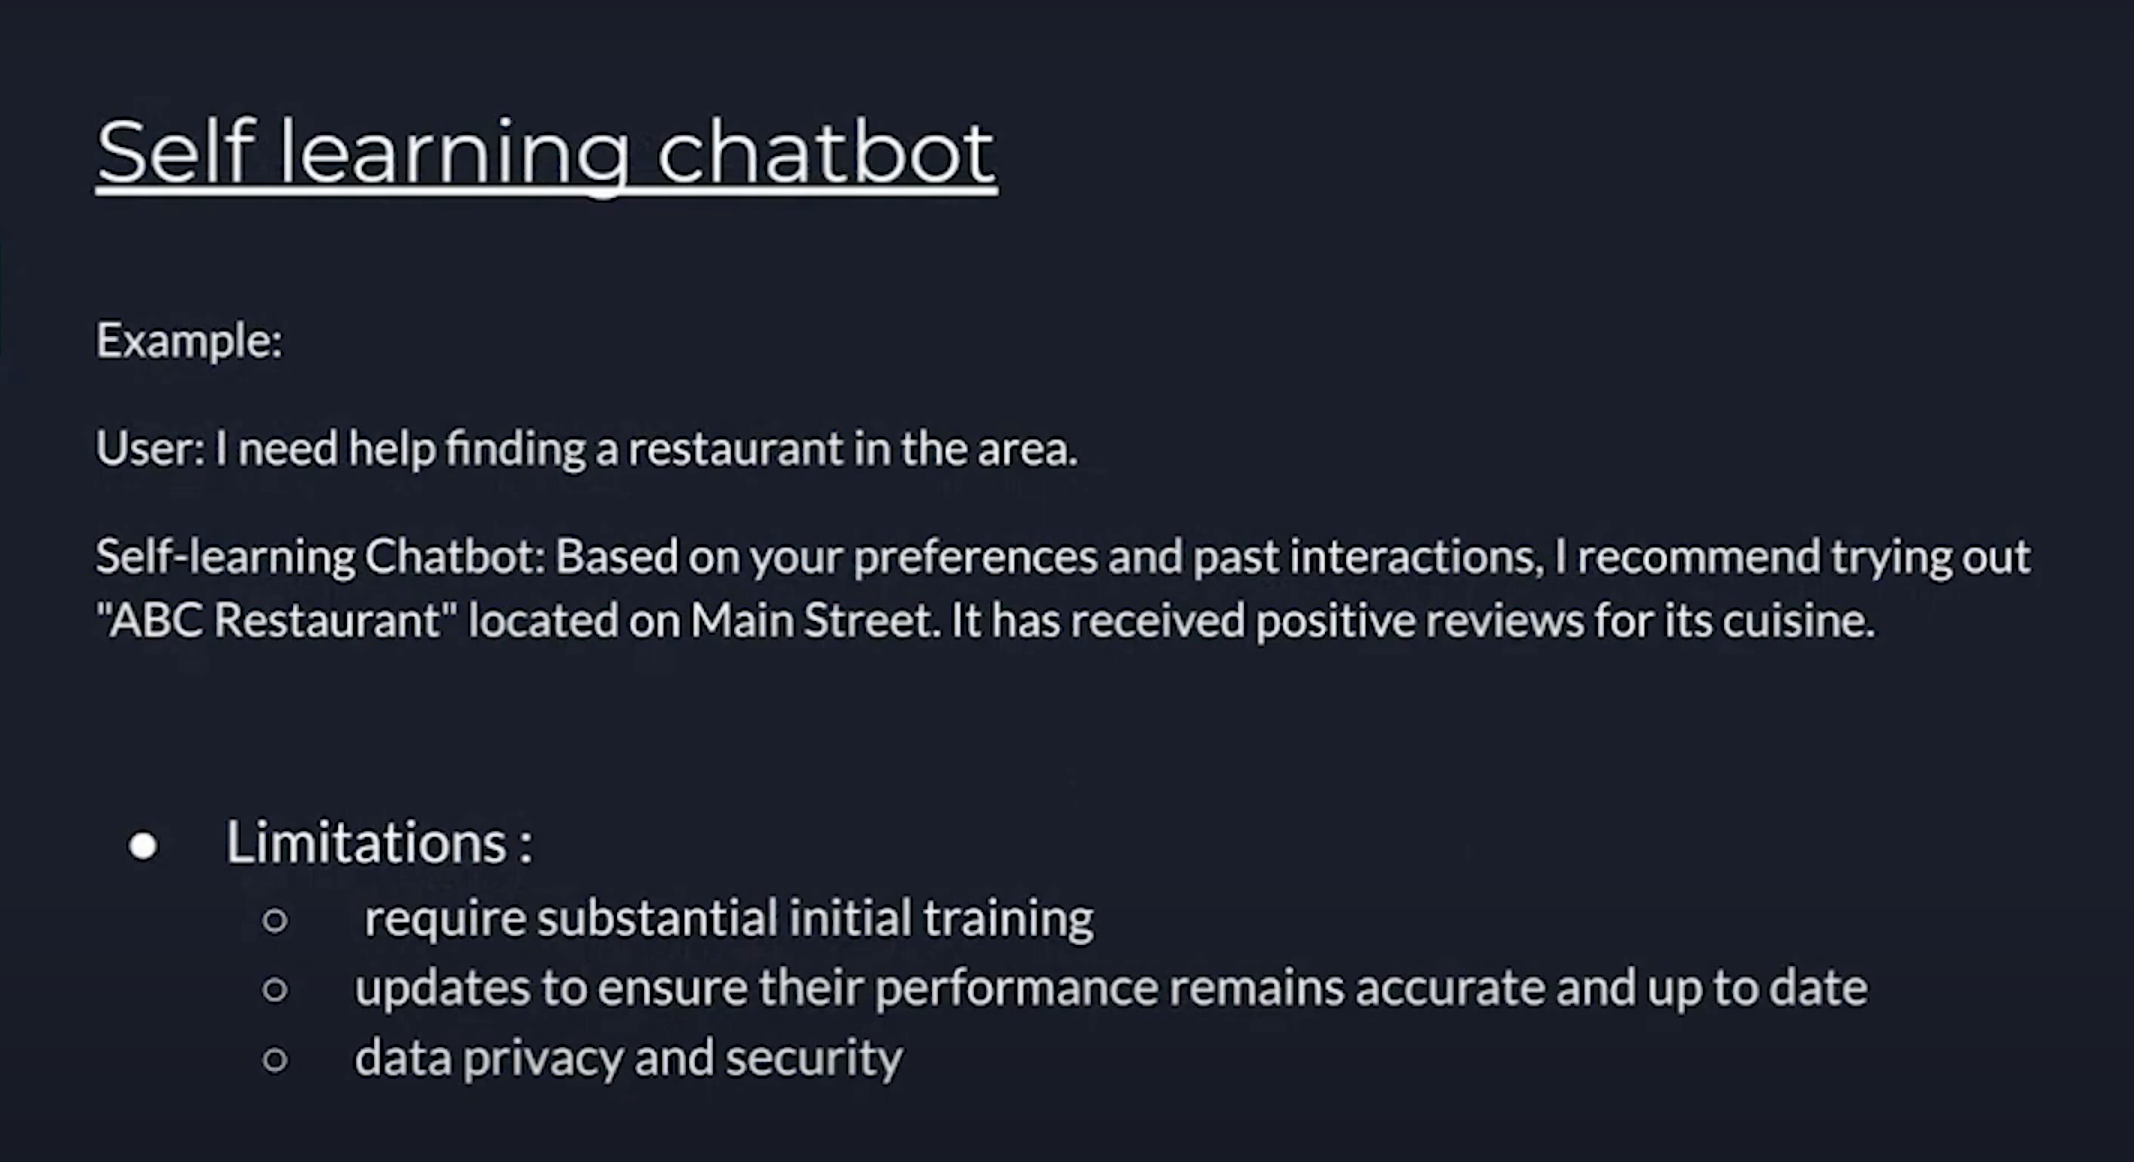 Self learning chatbots